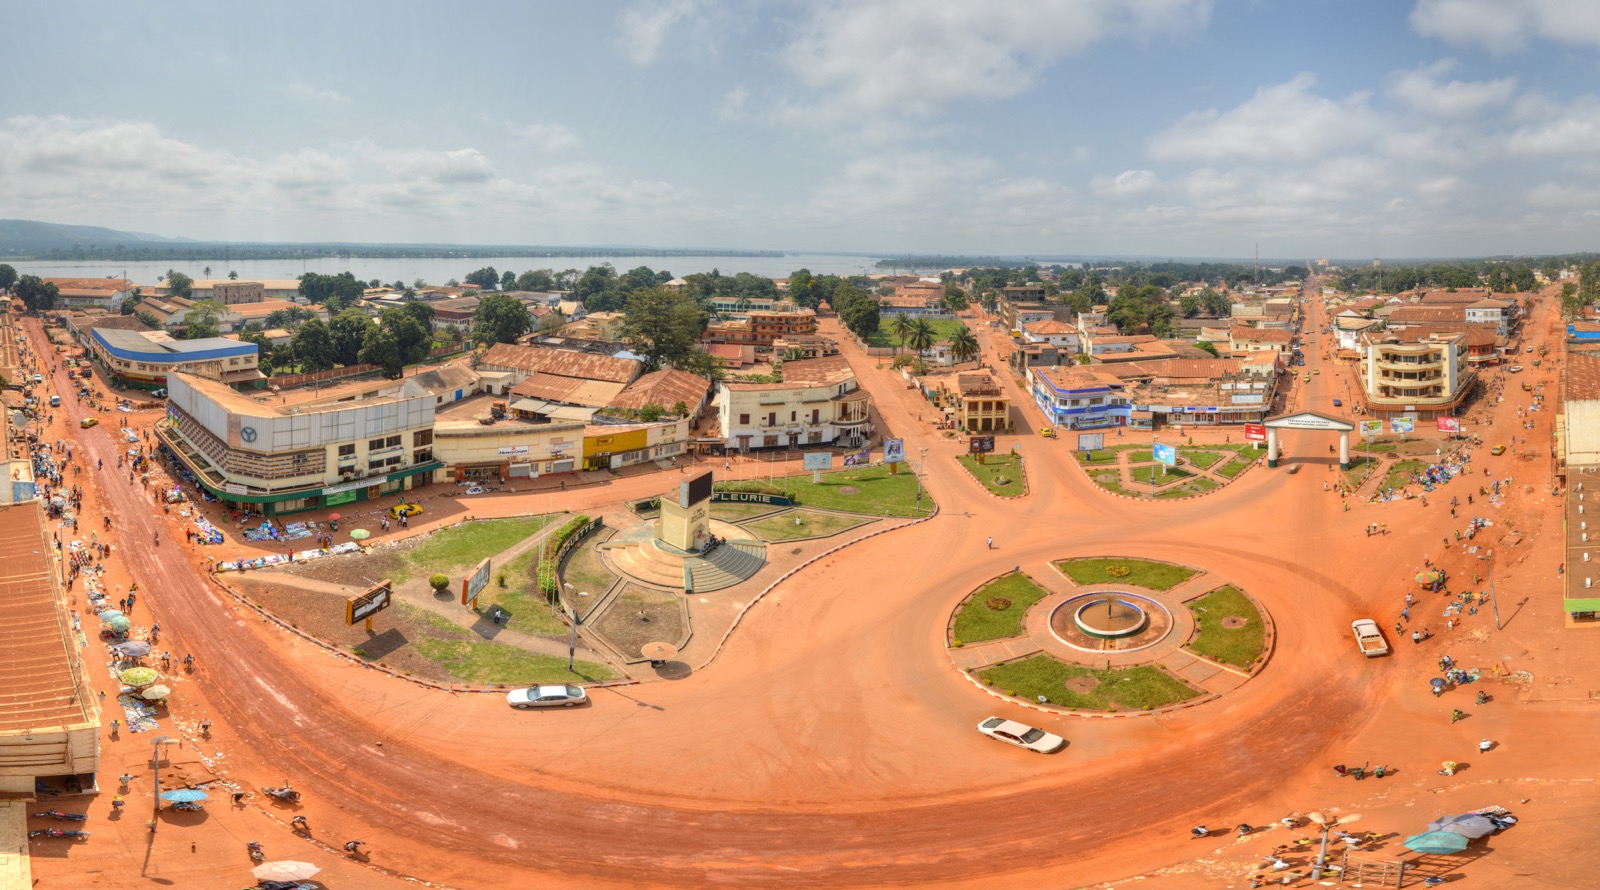 This City-Country Matching Quiz Gets Progressively Harder Bangui, Central African Republic